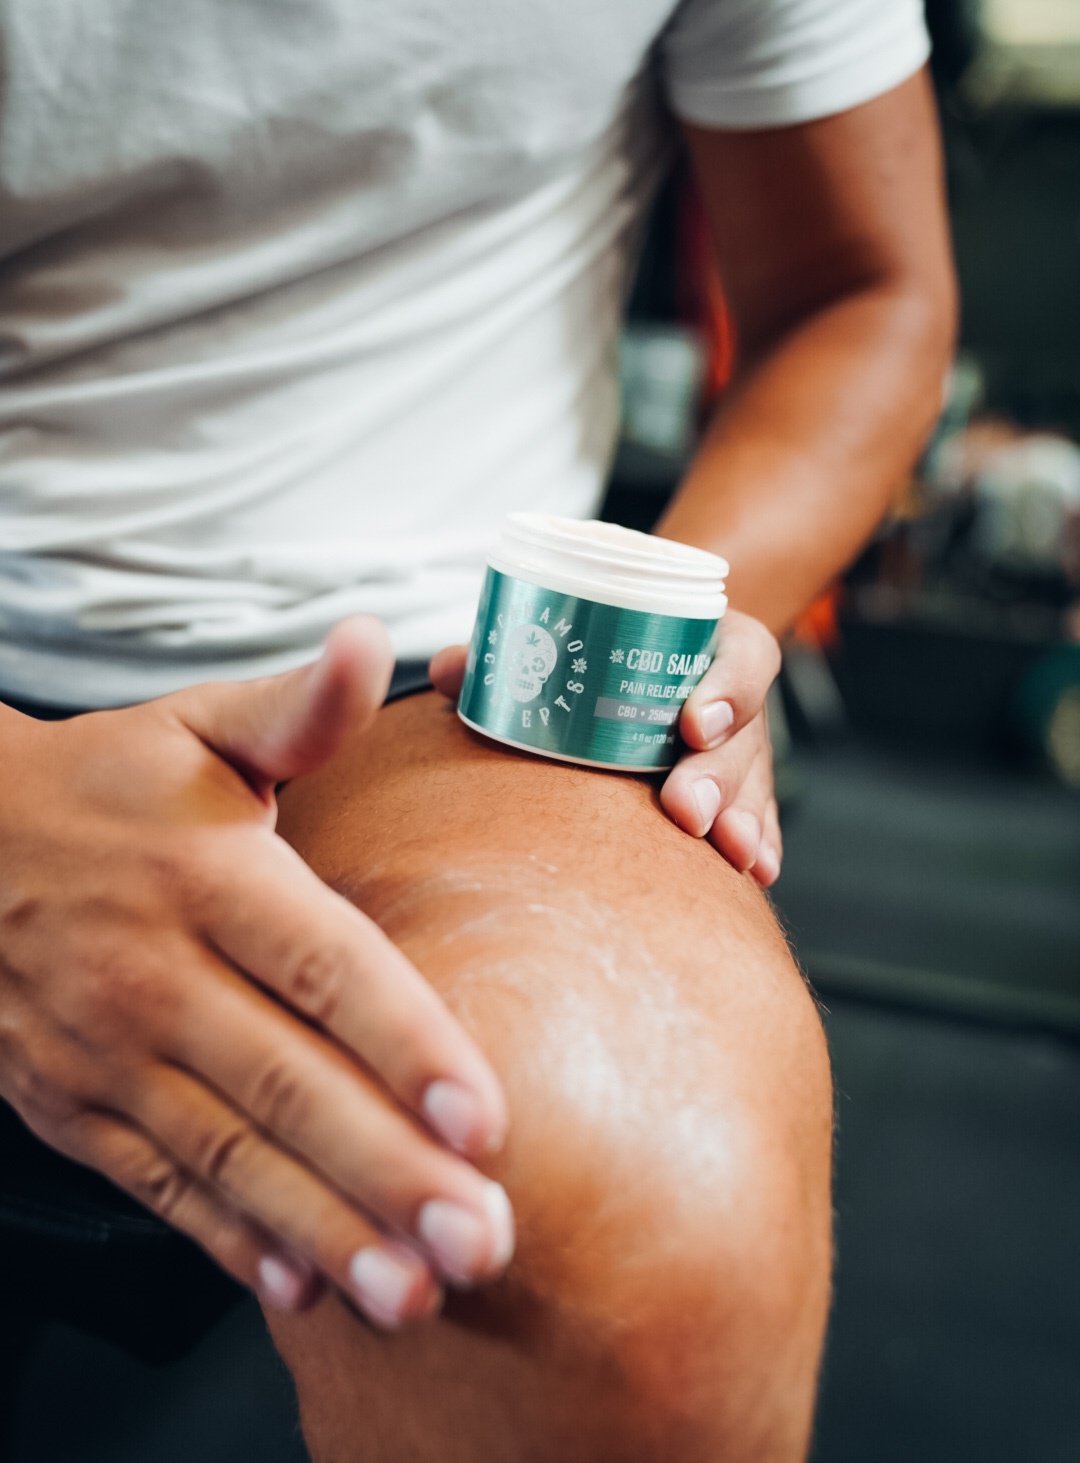 Applying Salve product to knee